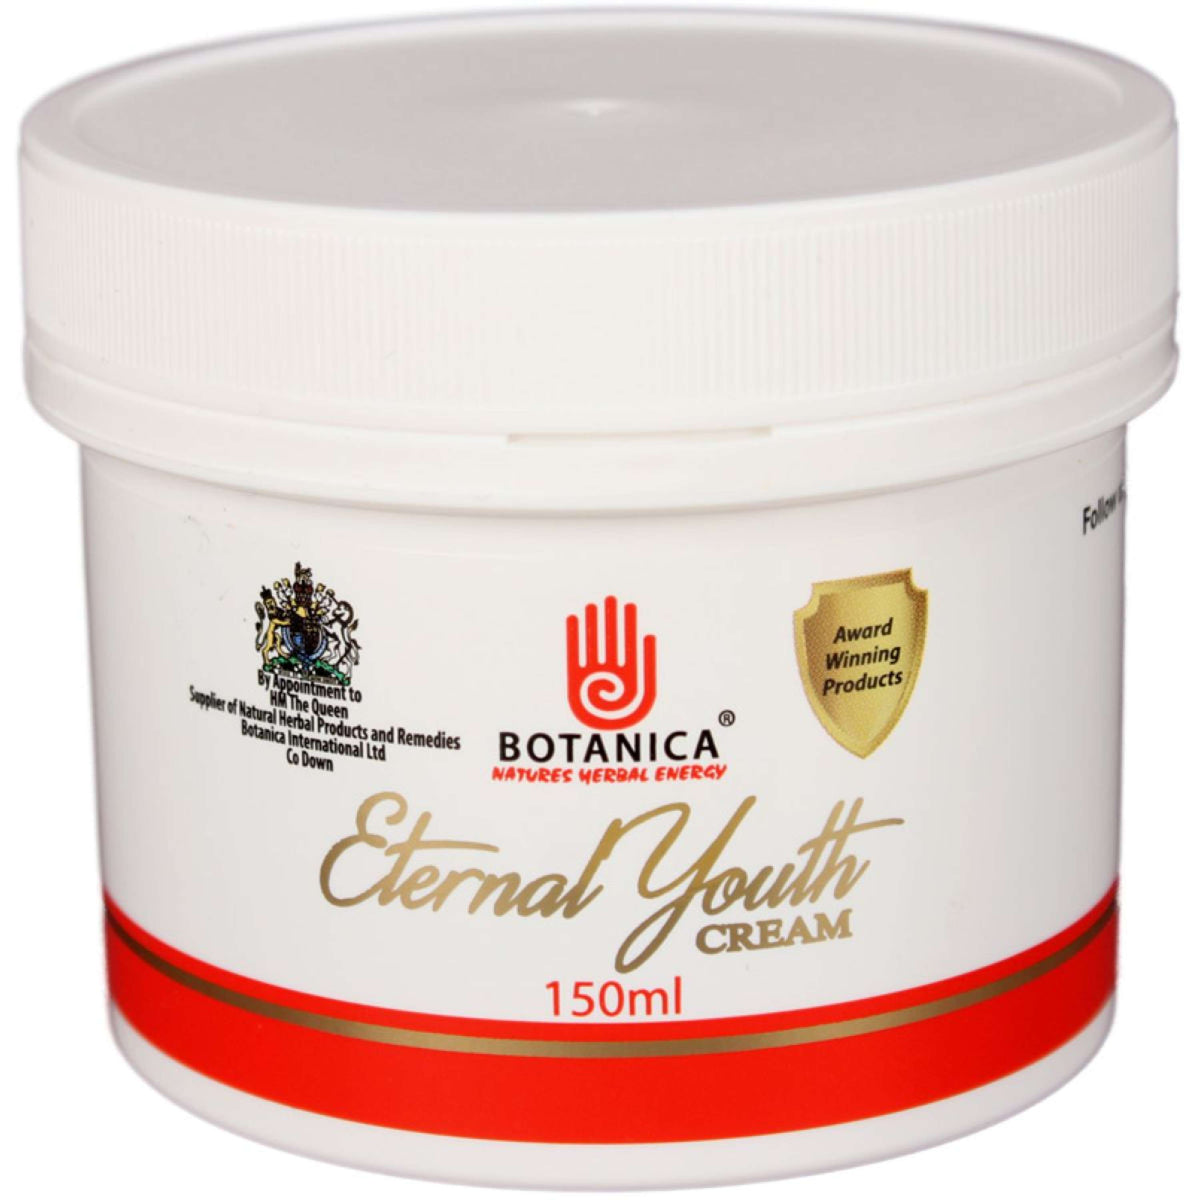 Botanica Ointment Eternal Youth